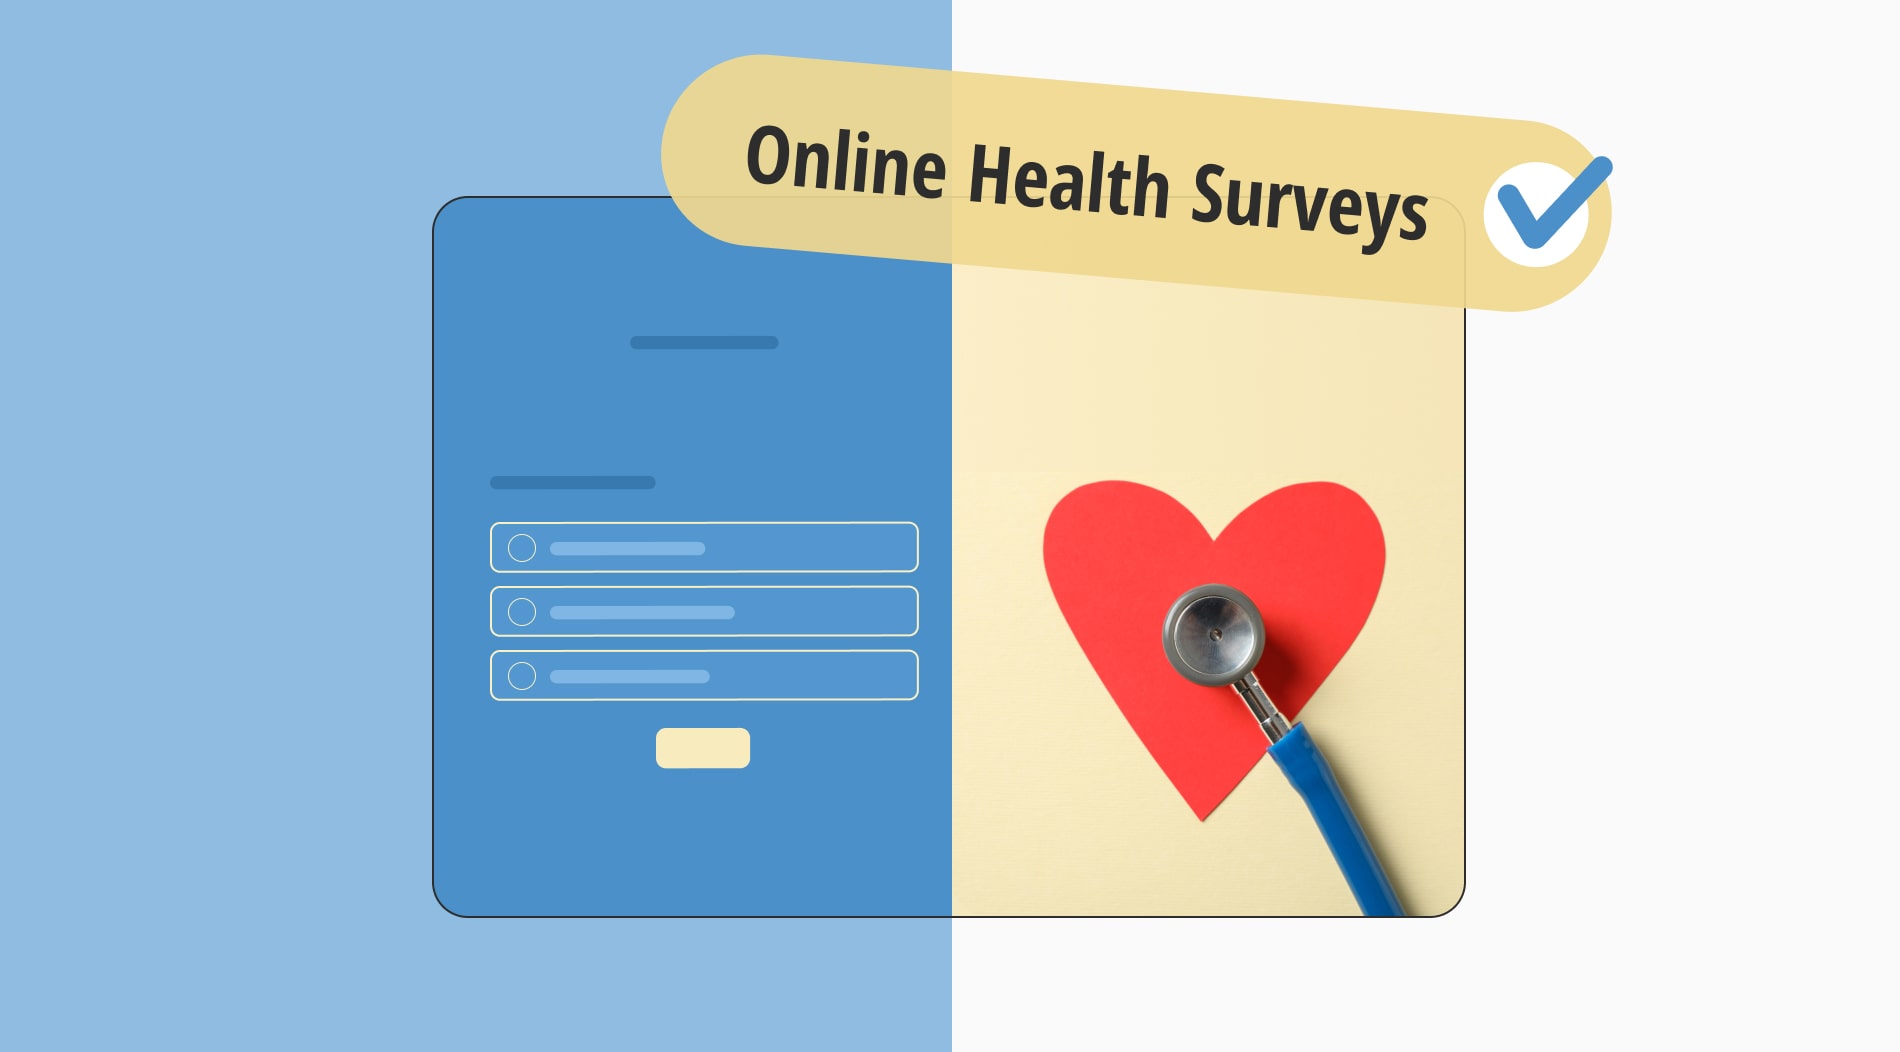 Online health surveys: Their role in shaping public health policy